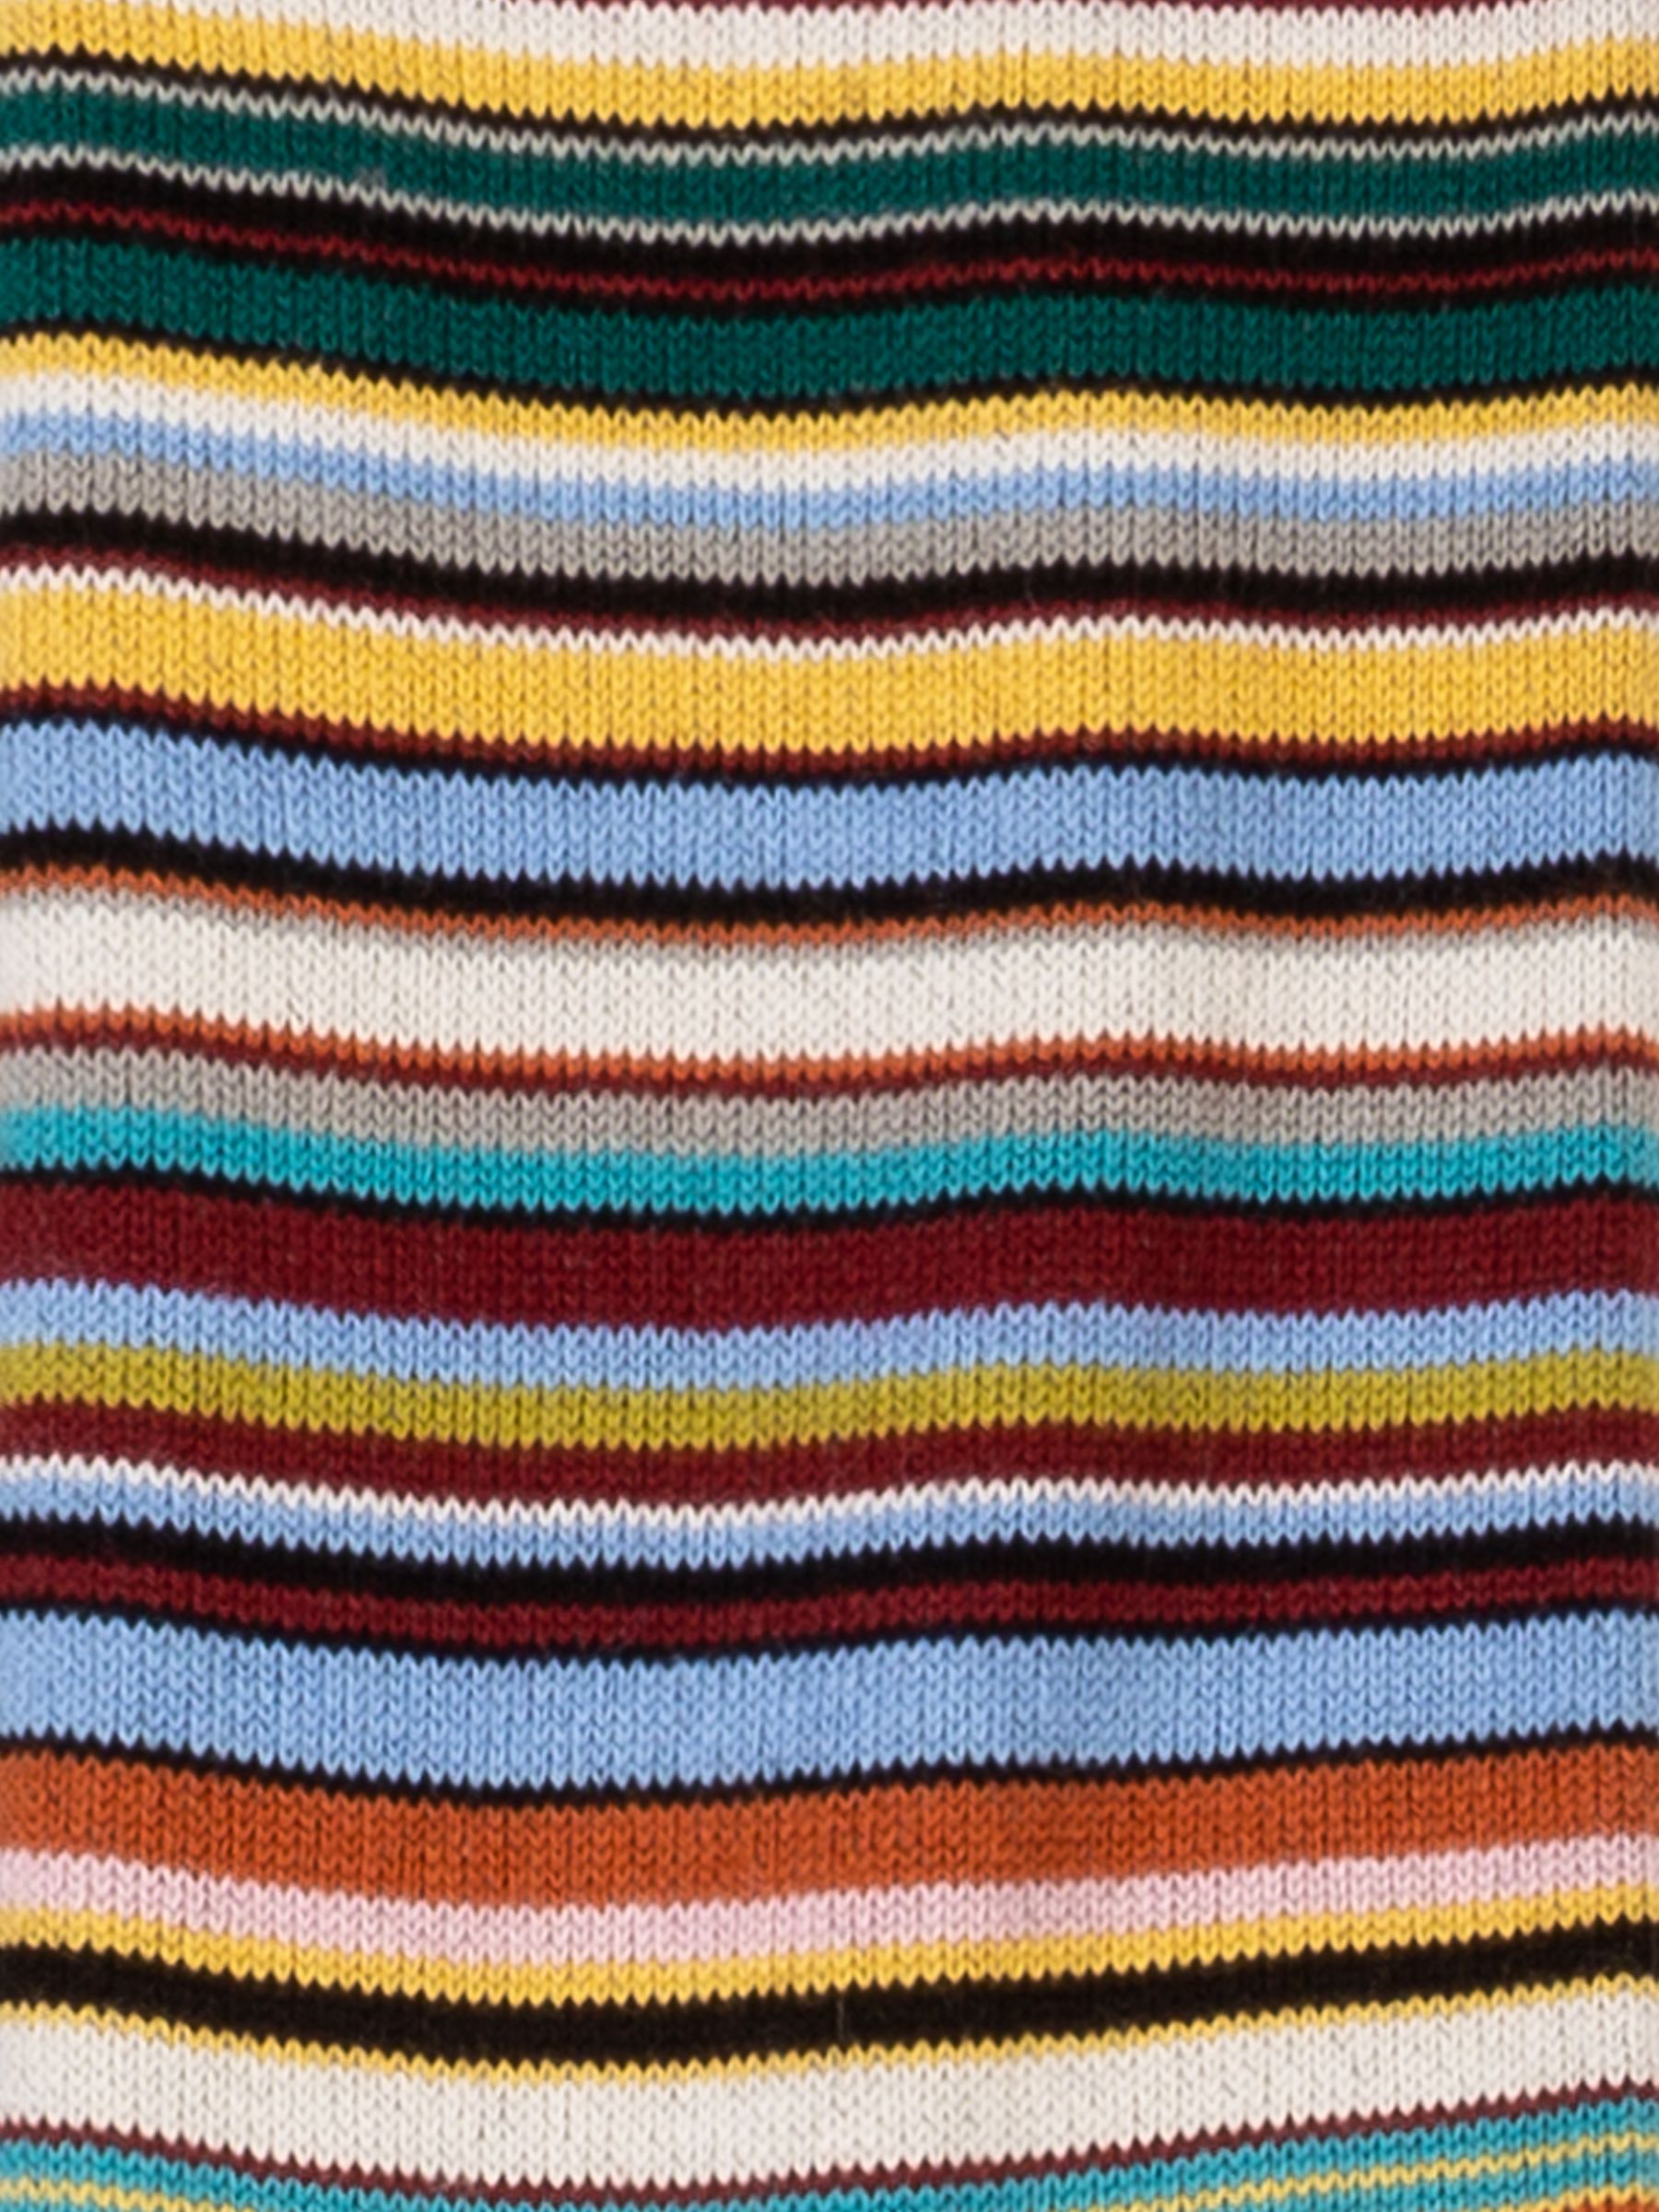 Buy Paul Smith Signature Stripe Socks, Pack of 2, One Size, Sign Stripe Online at johnlewis.com